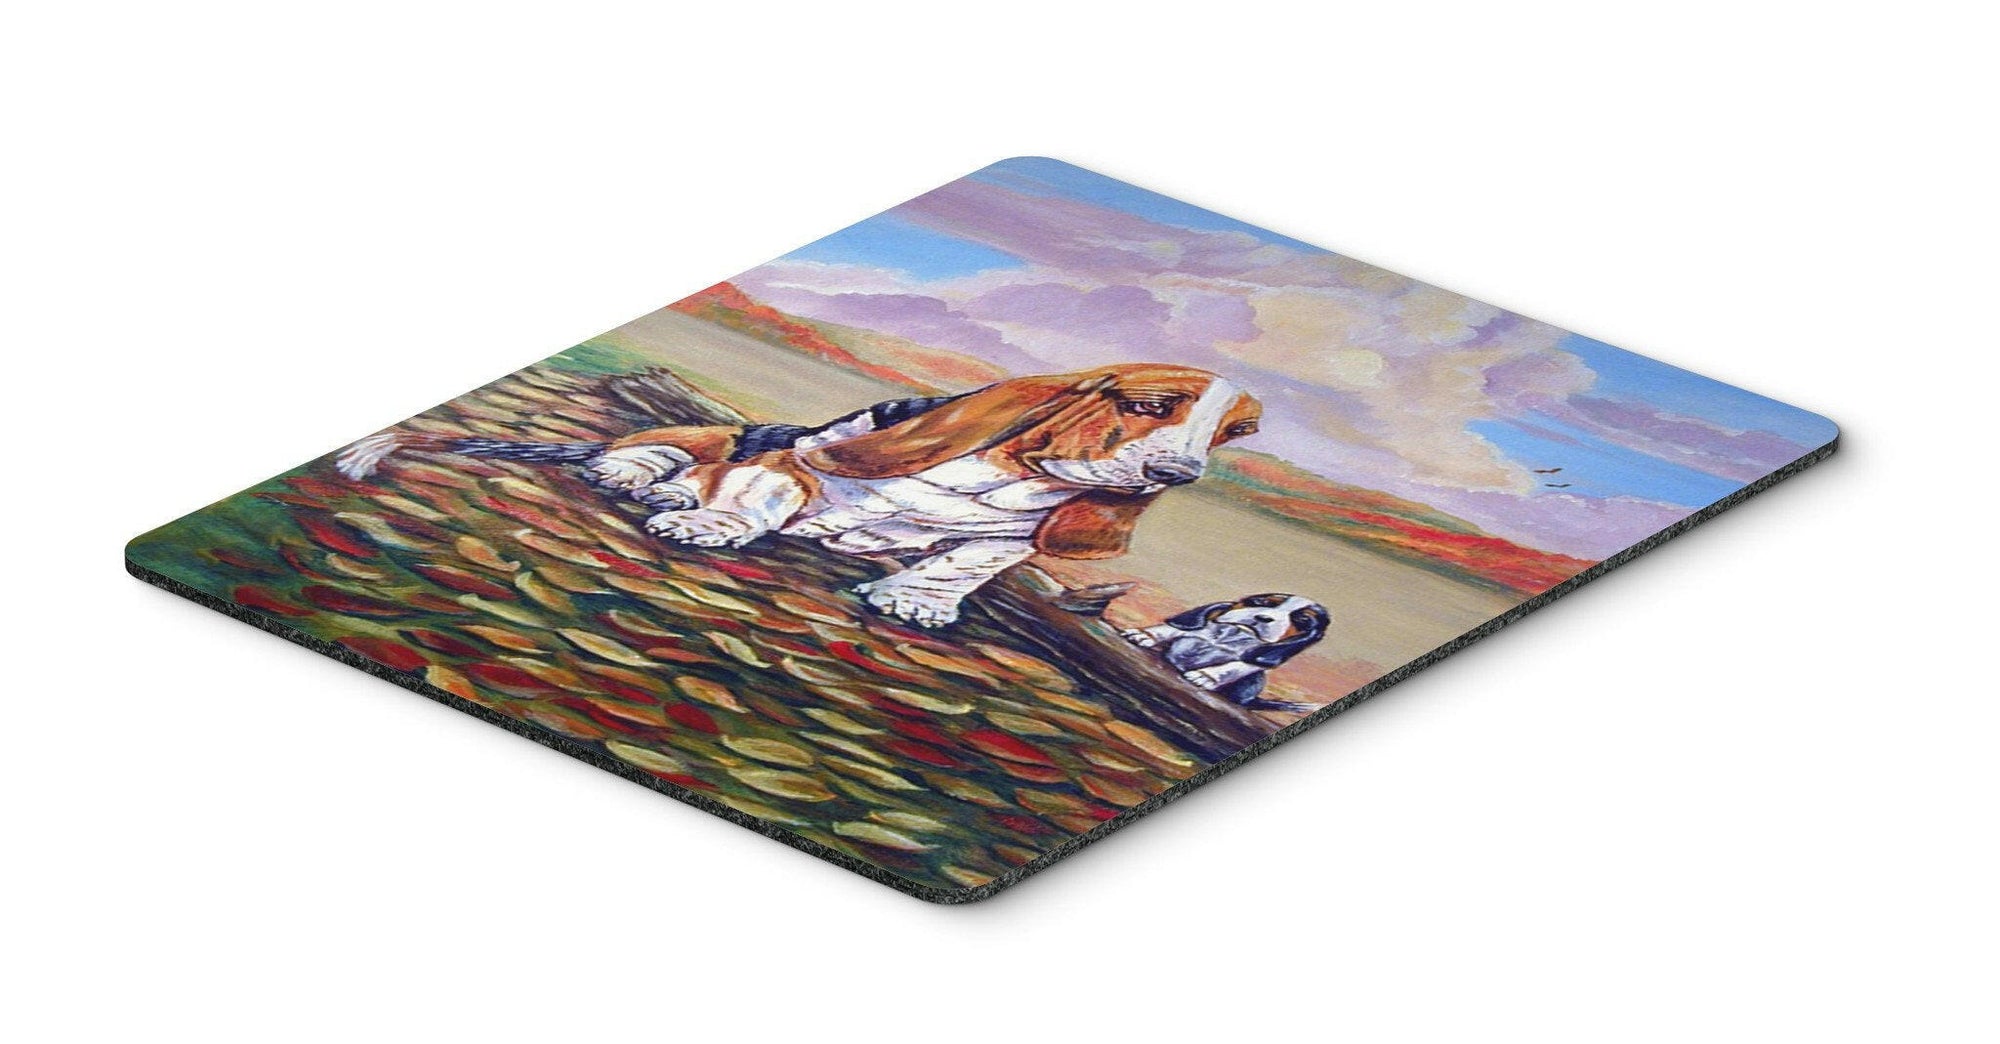 Basset Hound Little one watching Mouse Pad, Hot Pad or Trivet by Caroline's Treasures